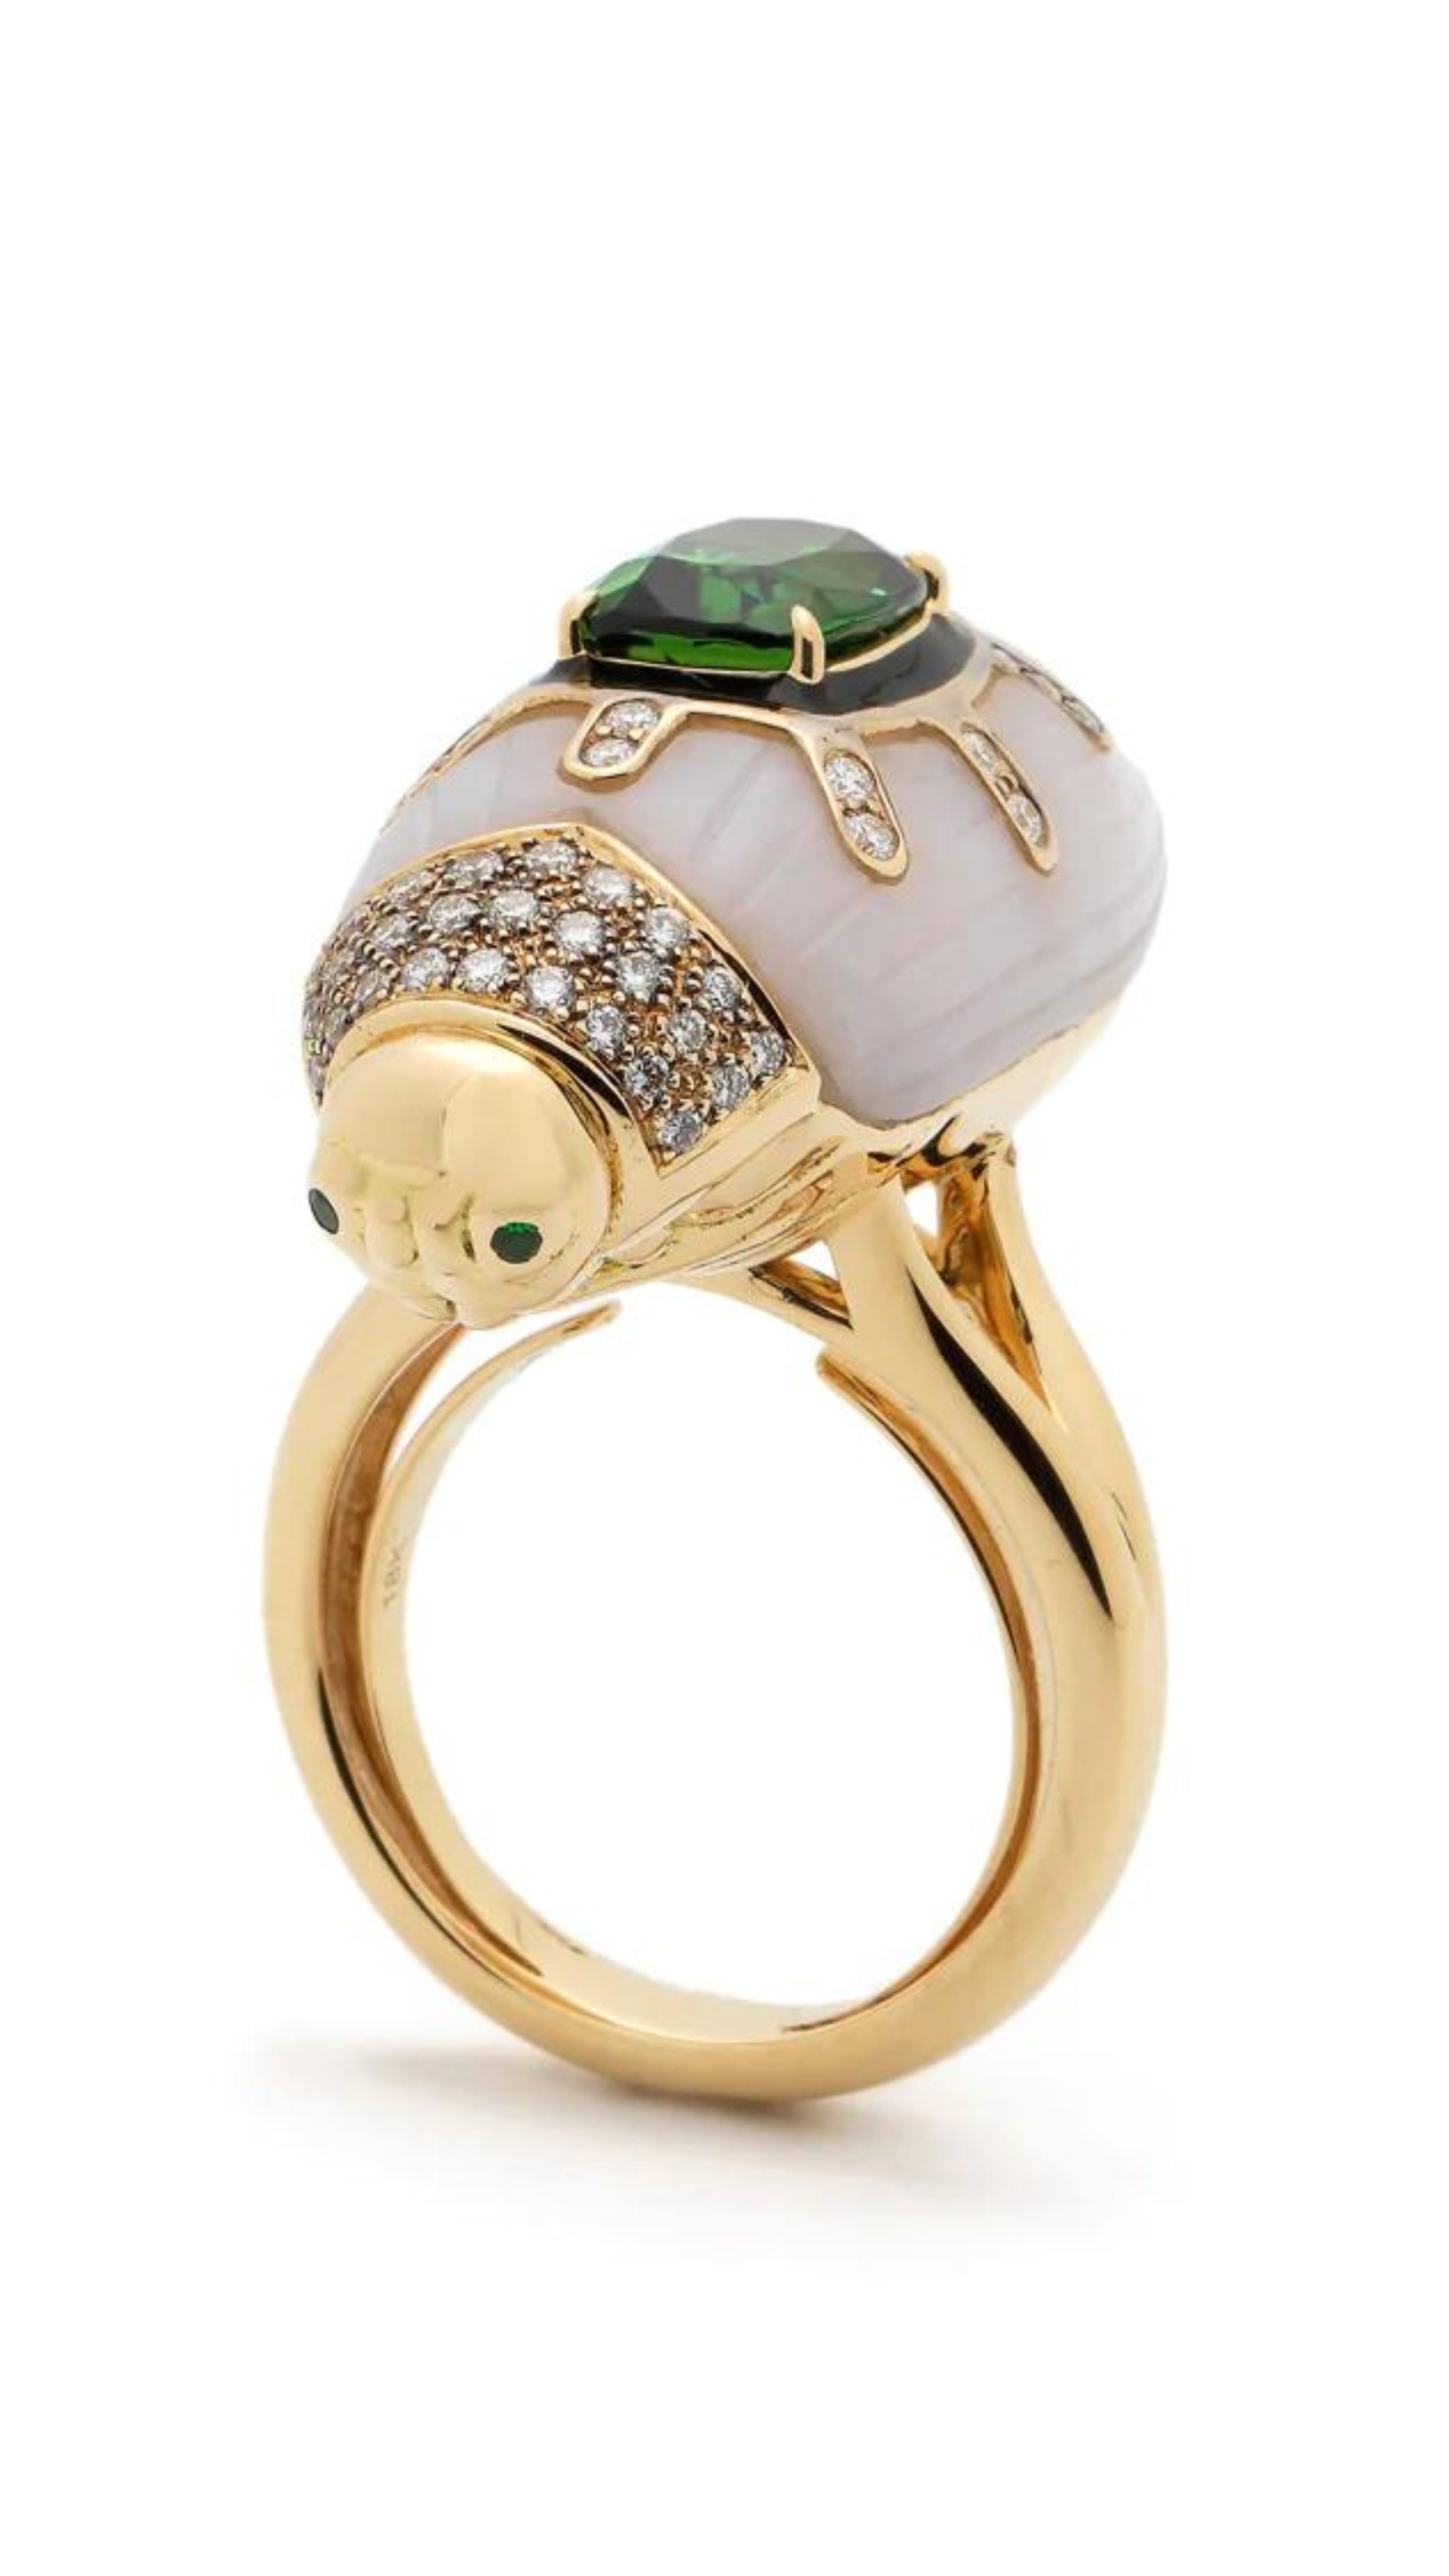 Bibi van der Velden Scarab Pink Opal Ring with Green Tourmaline. Art deco style large statement ring carved into a scarab shape from pink opal. Inlaid with green tourmaline and pave set diamonds adorn the front. Sustainable jewelry. High jewelry collections. Cocktail ring. Ring shown from the front and side view.